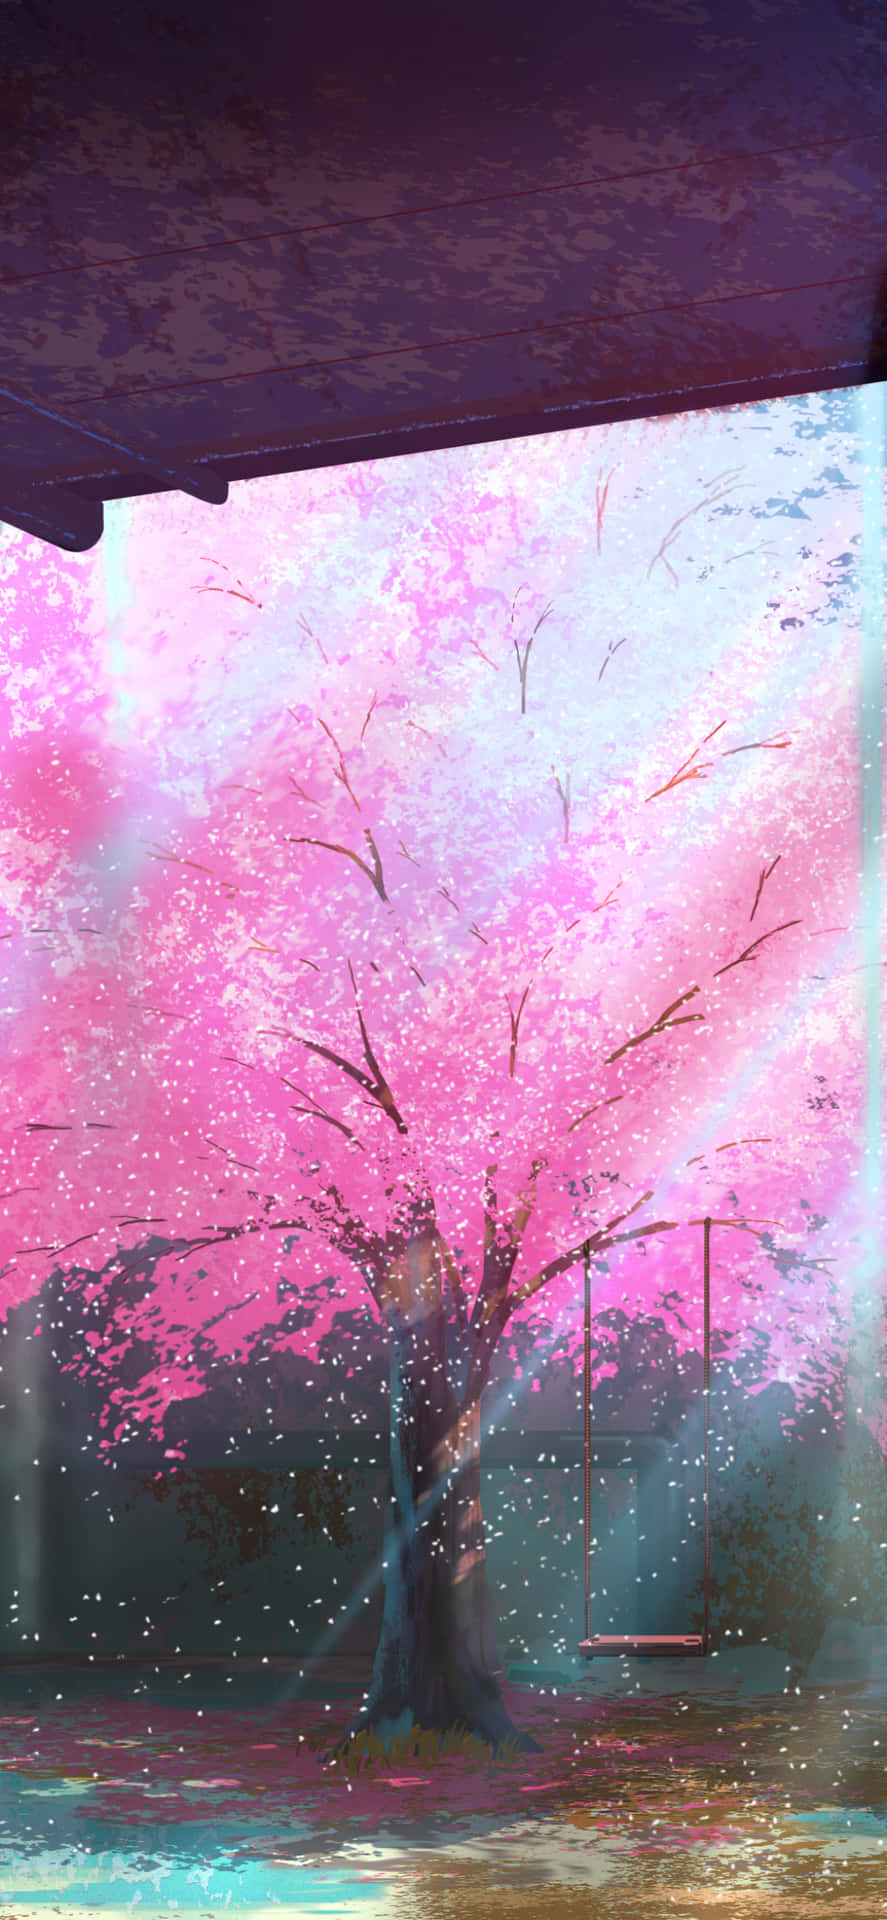 A pink cherry blossom tree in full bloom. Wallpaper